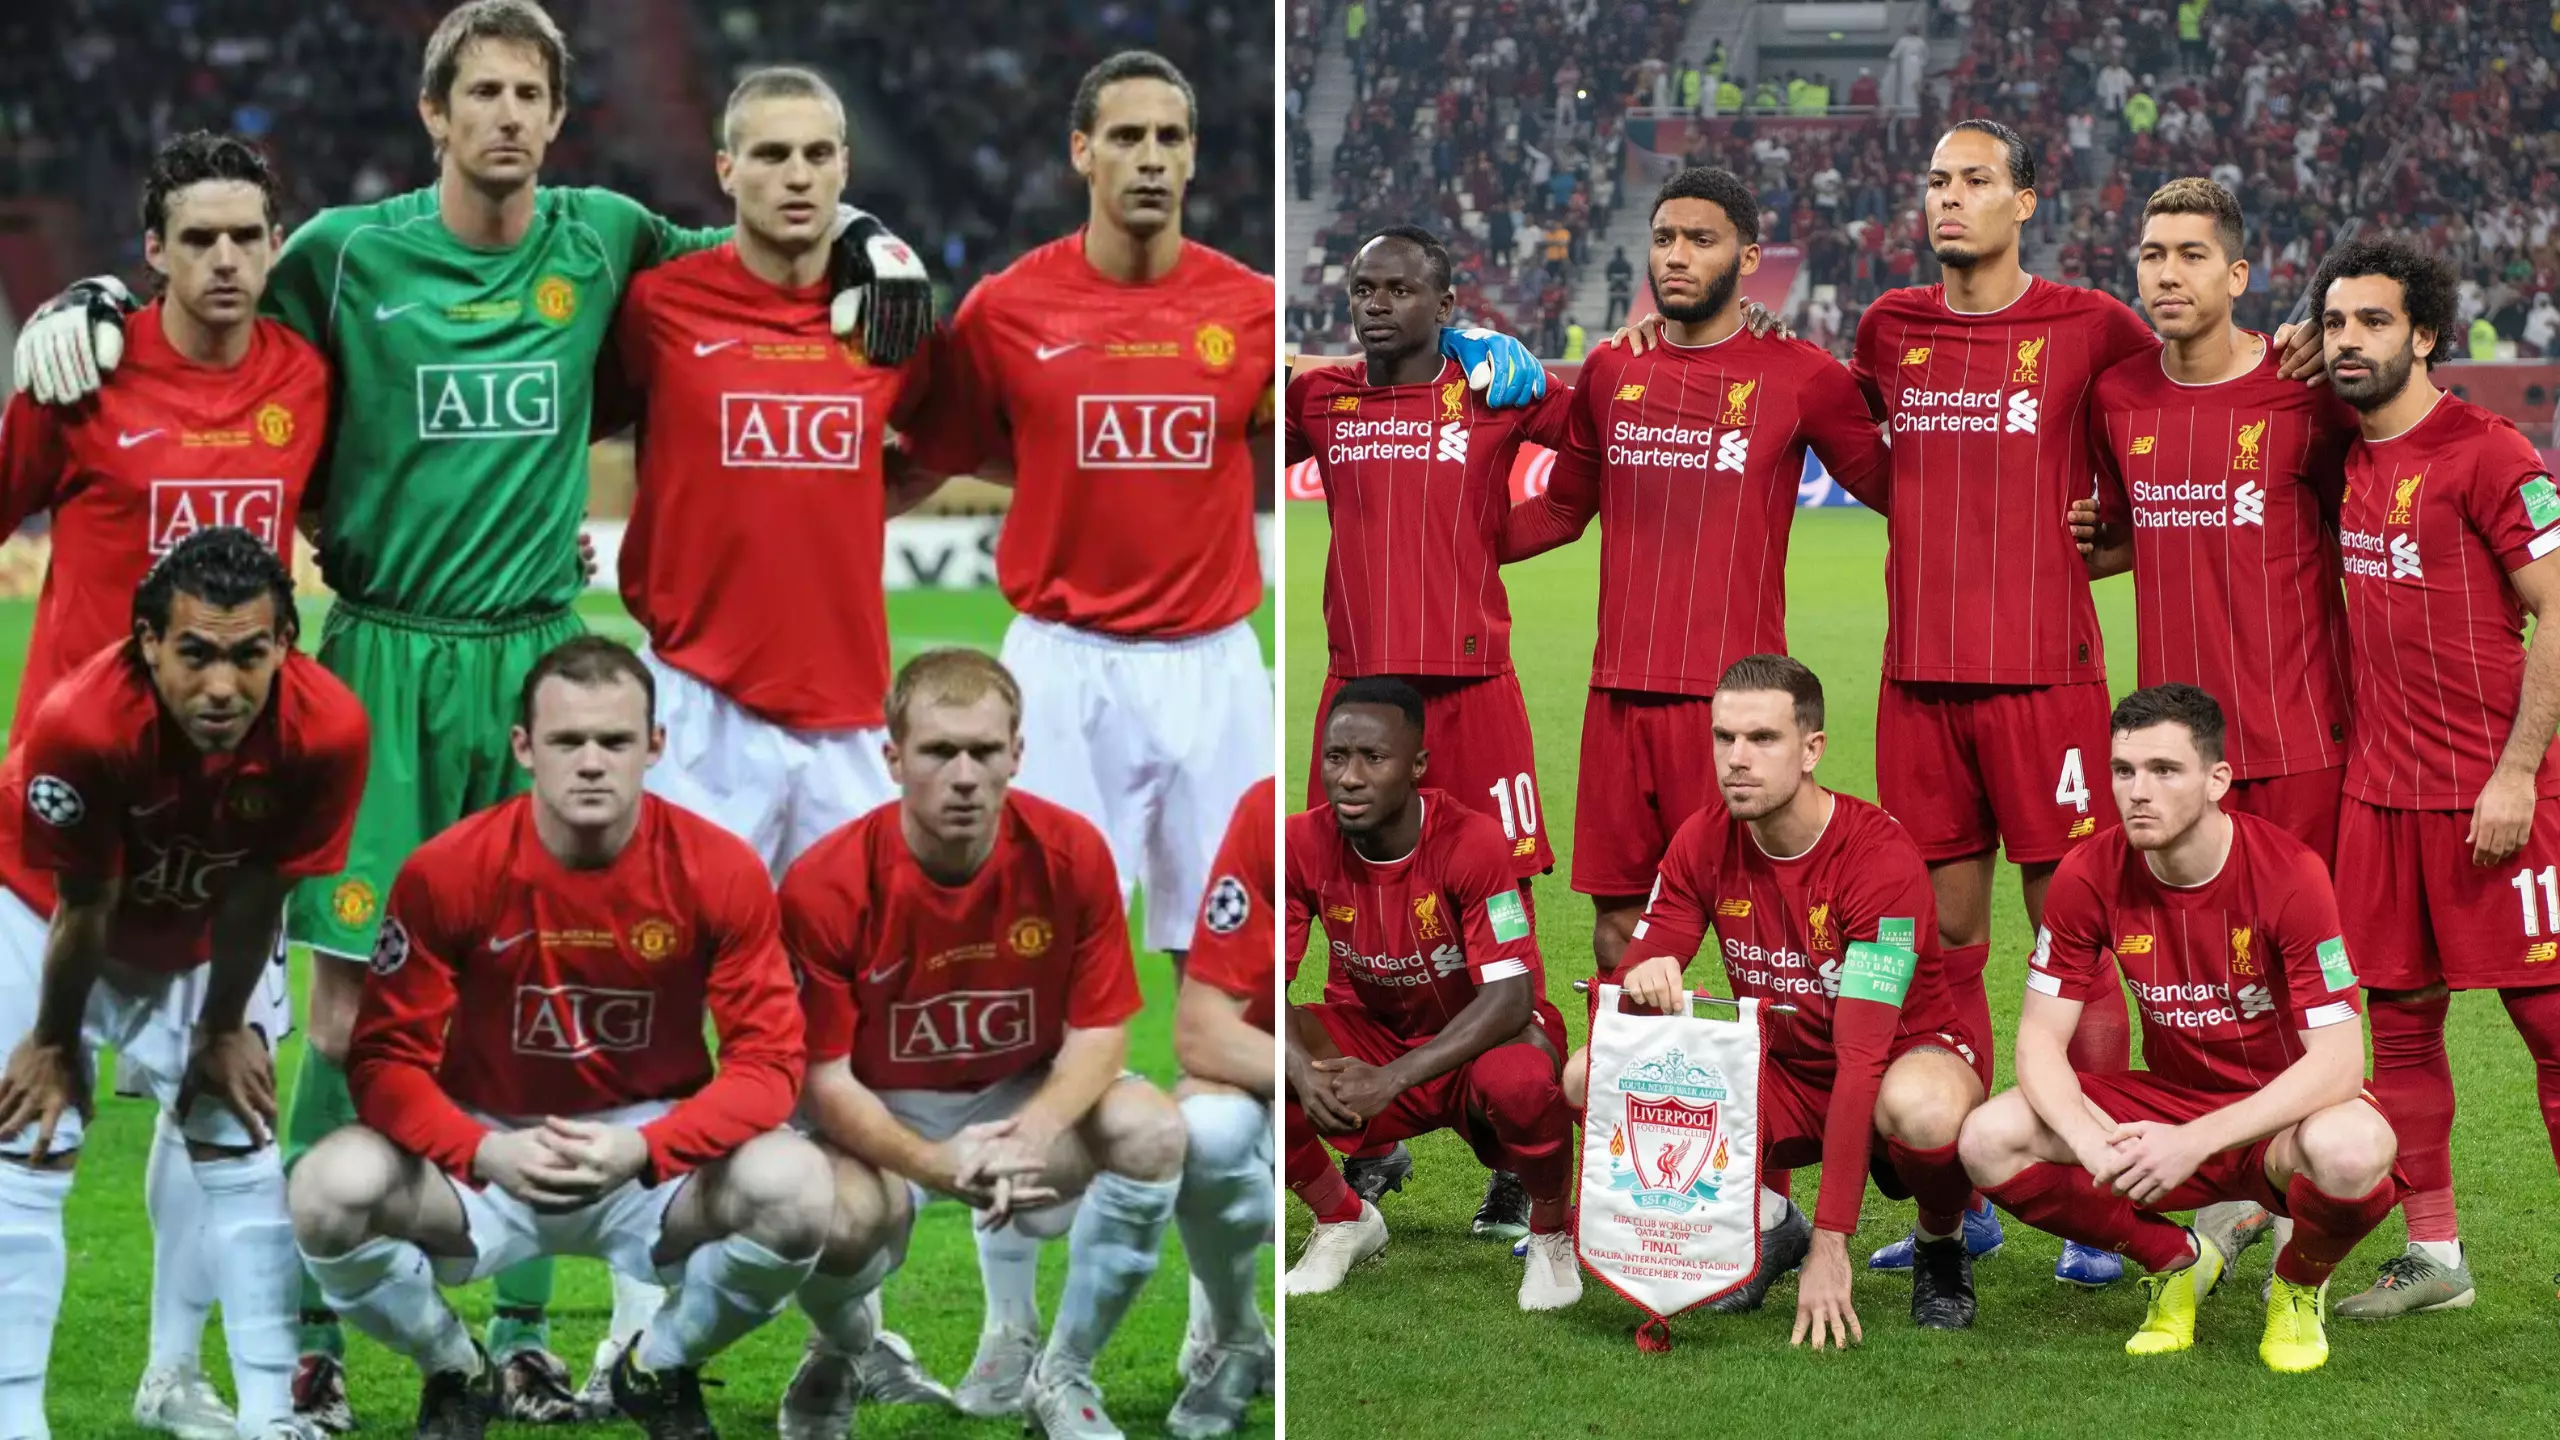 Manchester United Fan Rates Their 2008 XI Compared To Liverpool's Current Team